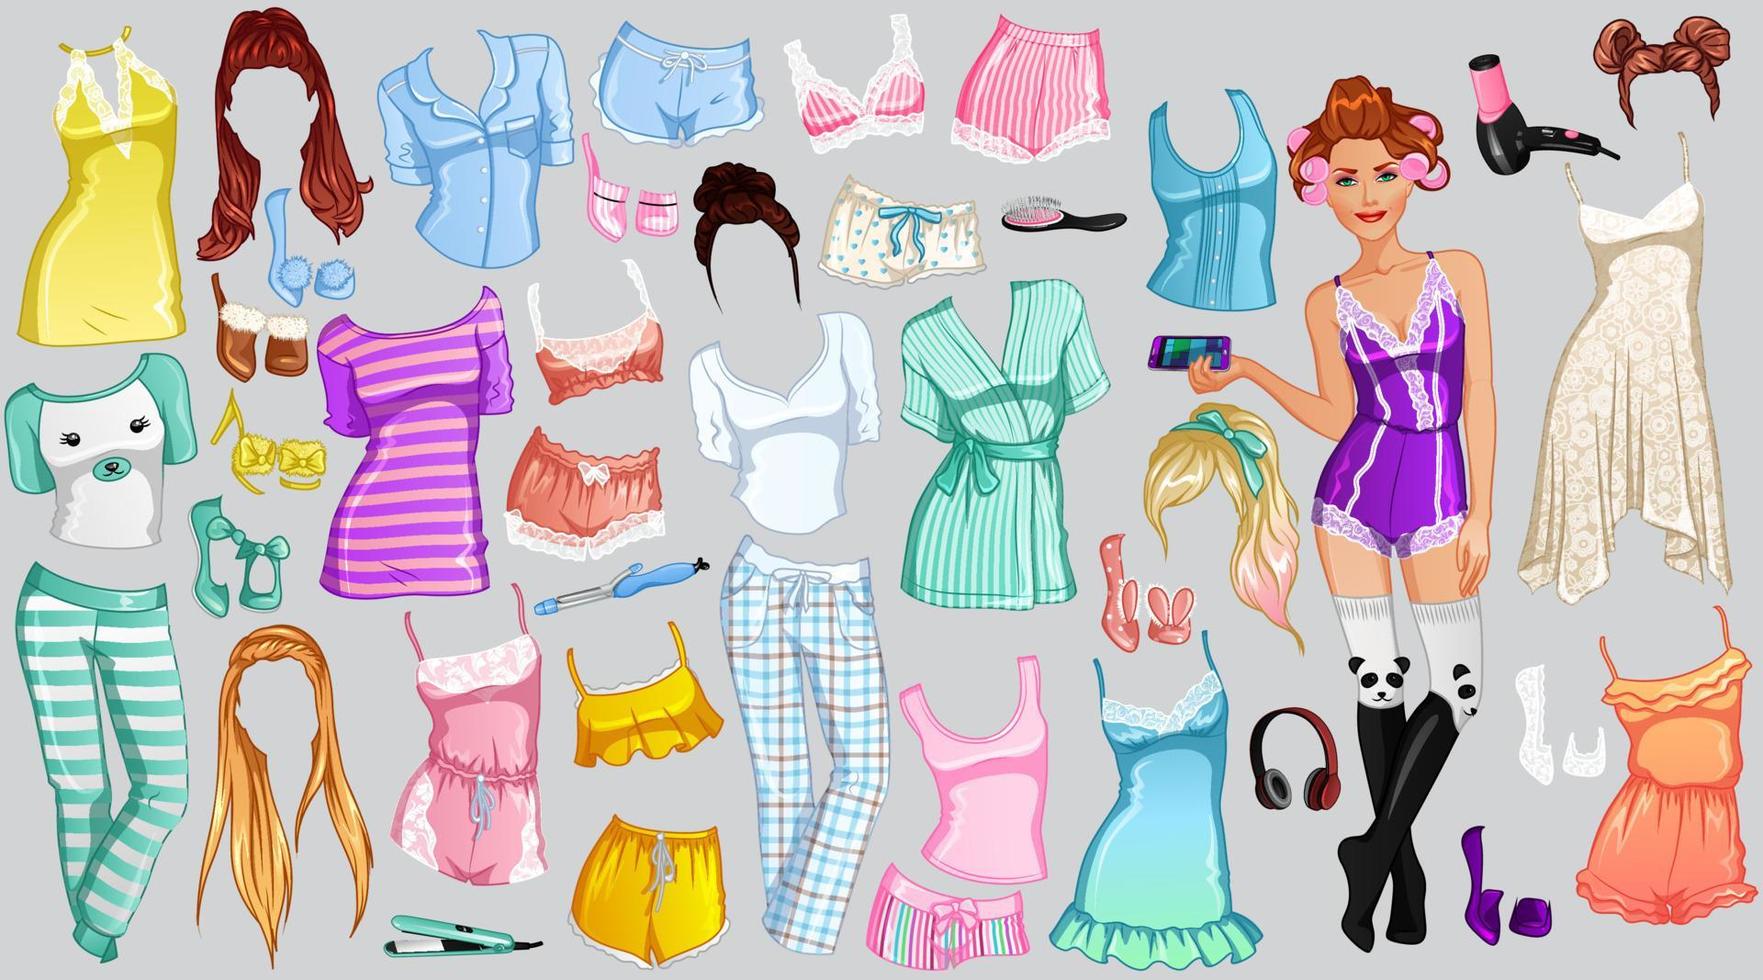 Pyjama Party Paper Doll with Beautiful Lady, Outfits, Hairstyles and Accessories. Vector Illustration